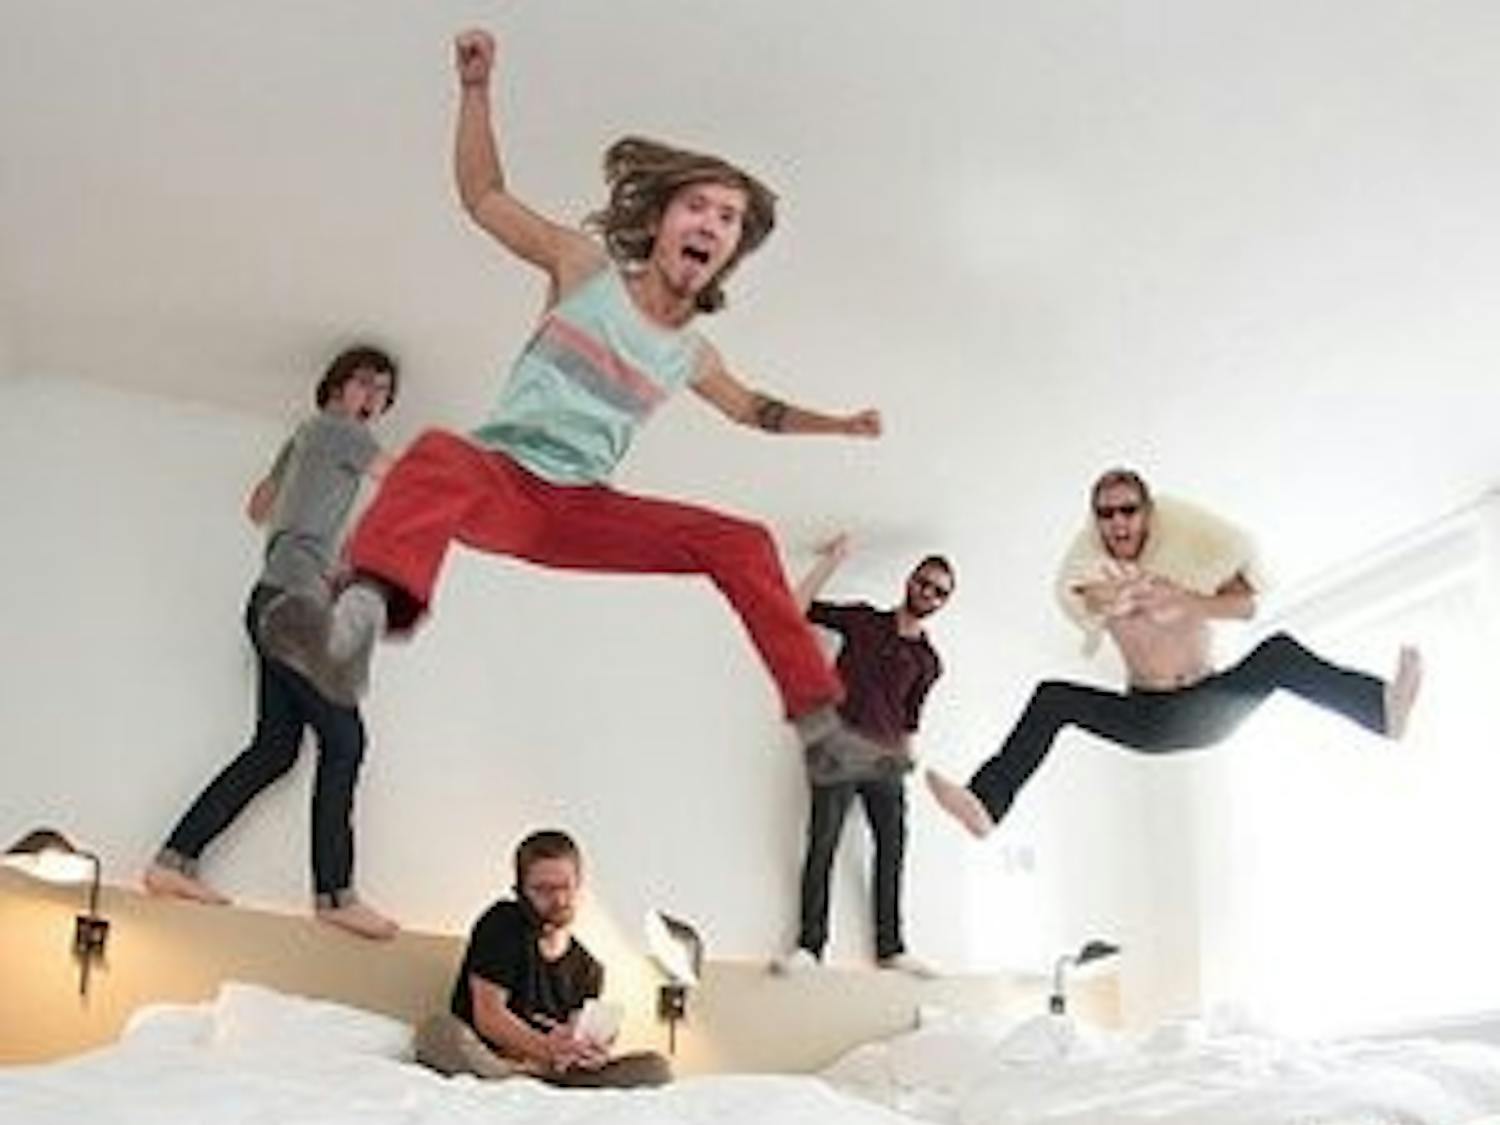 Moon Taxi, a Nashville, Tenn. band that frequents Auburn, will be playing at War Eagle Supper Club Nov. 2. Tommy Putnam, the bassist, said Auburn was their first ever gig. (Courtesy of Moon Taxi)